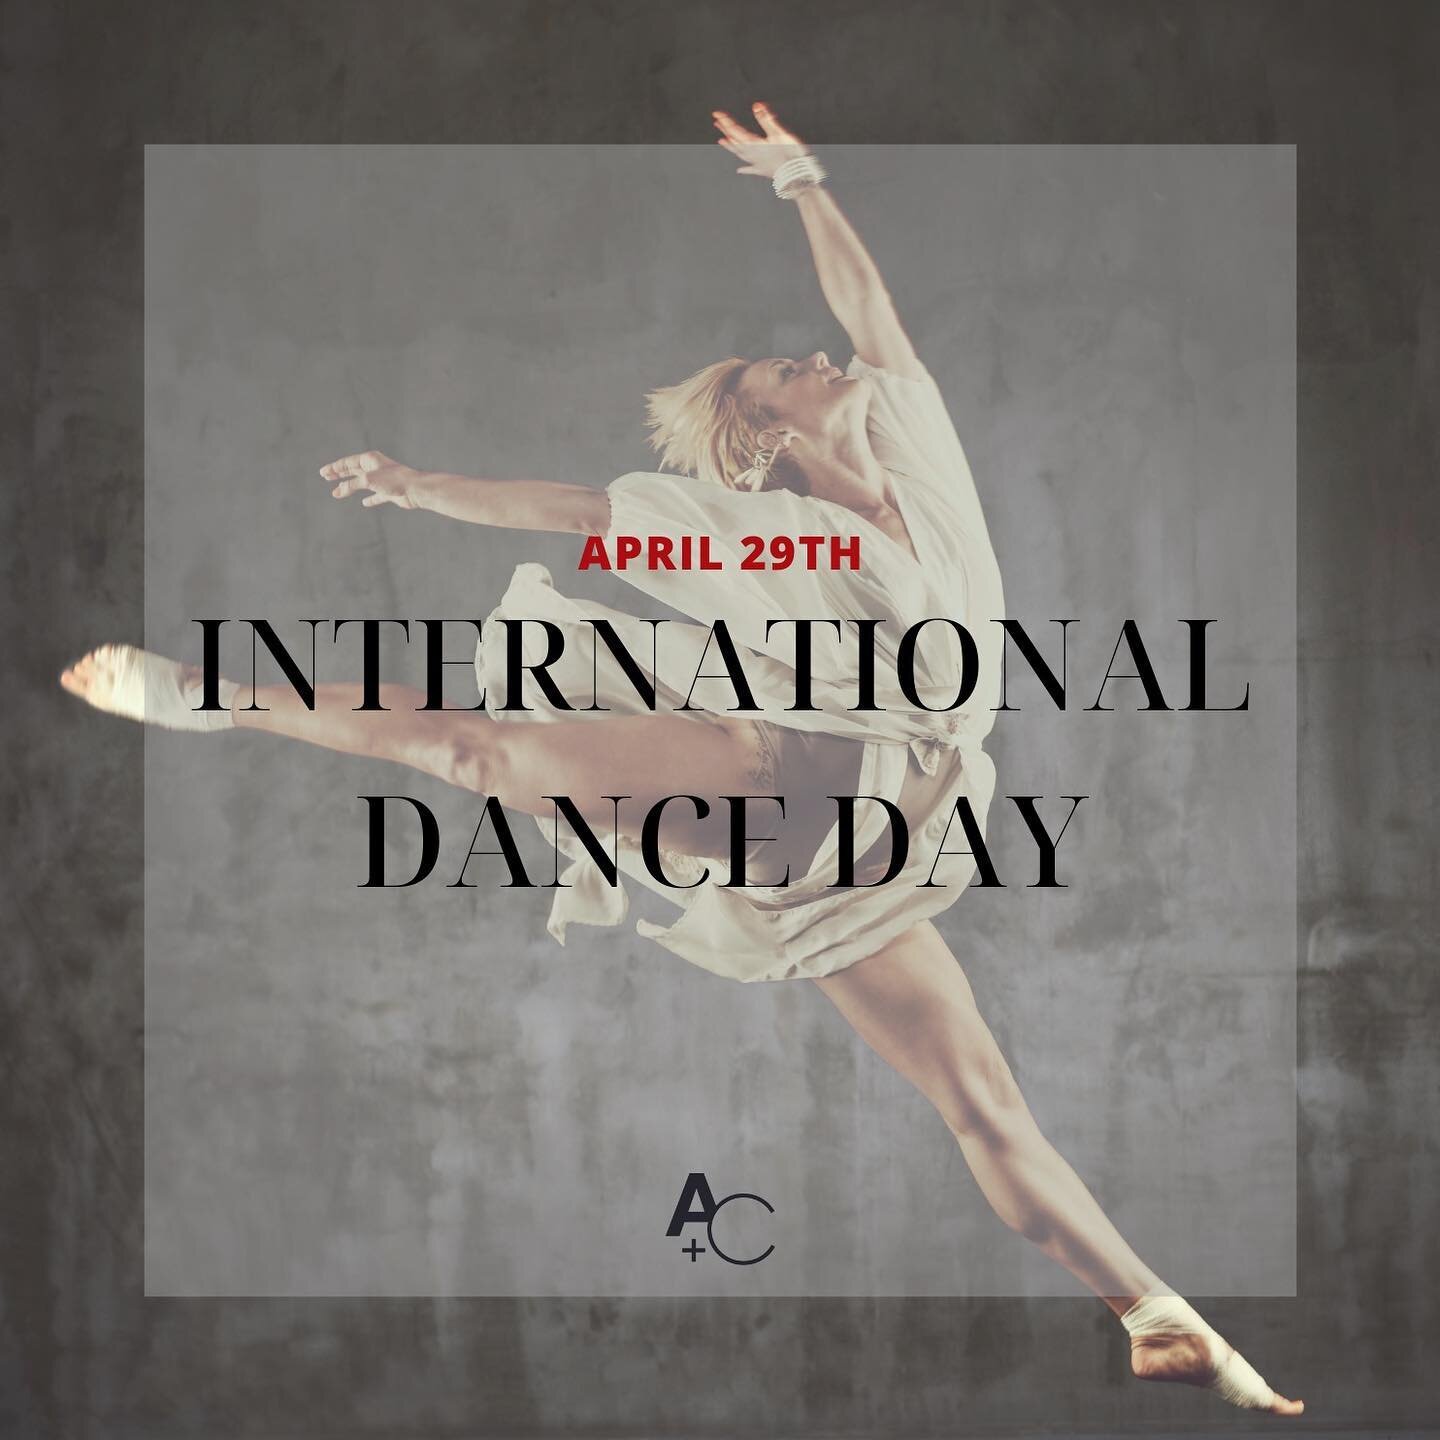 It&rsquo;s International Dance Day!
Do you have a passion for dance? Are you interested in fundraising to support what you love? 

Check out our website to learn more about Artists + Causes and what our fiscal sponsorship model offers - link in bio. 